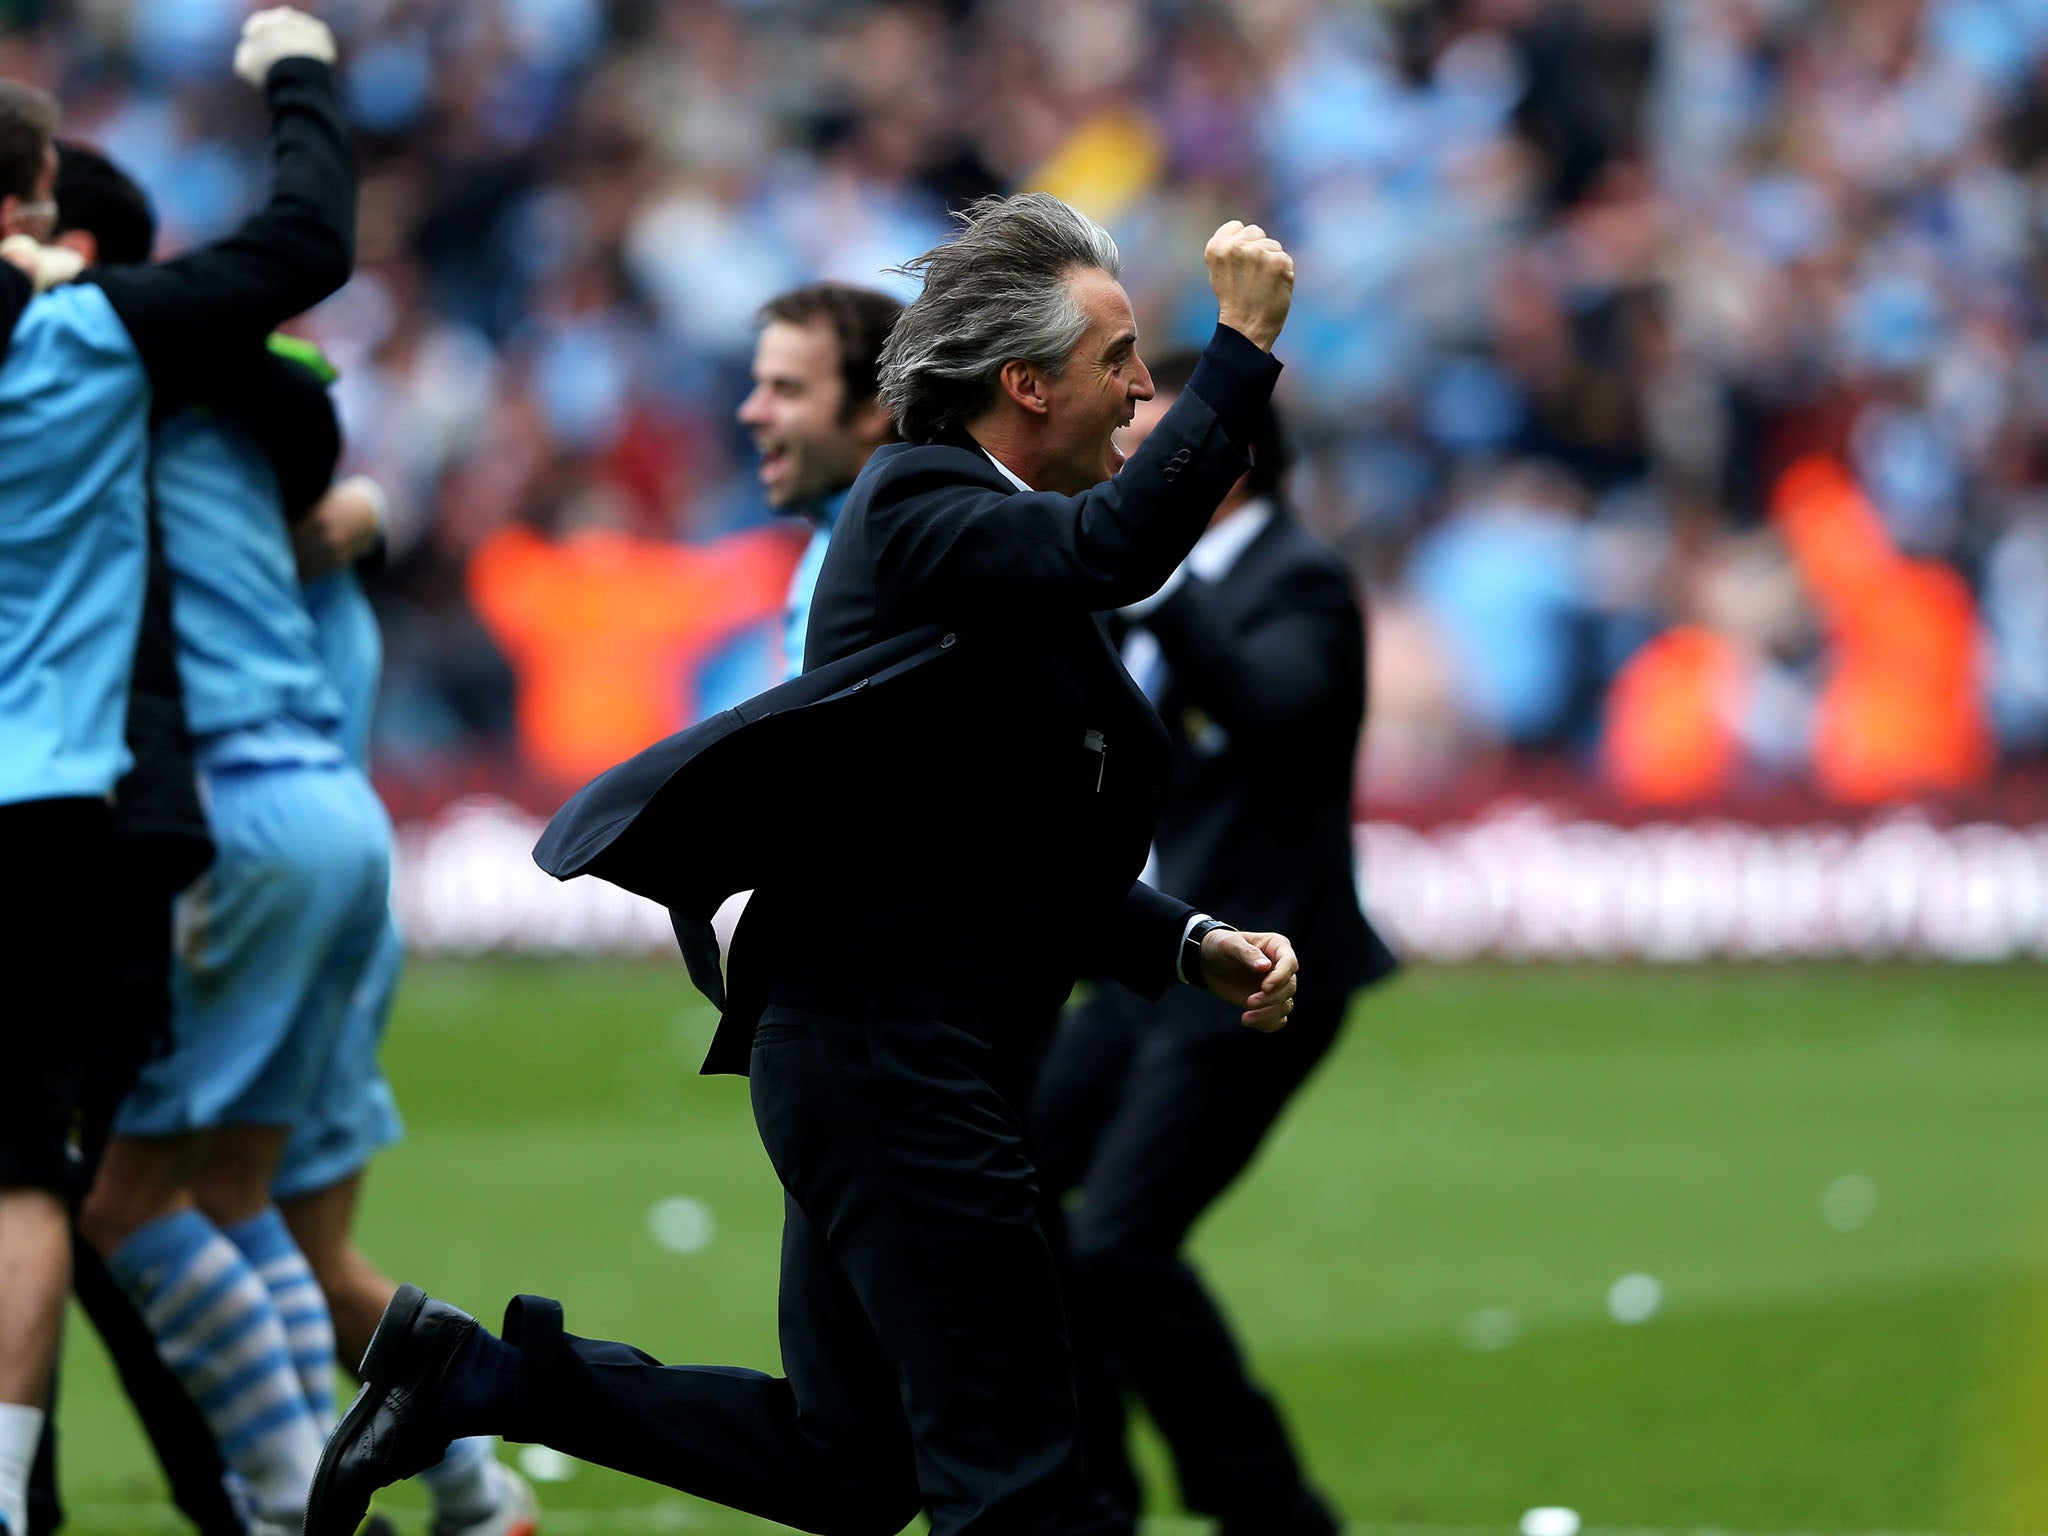 13 May 2012: Mancini runs onto the pitch at after the final whistle of a 3-2 win over Queen's Park Rangers celebrating Manchester City winning the Premier League title on goal difference over Manchester United (Alex Livesey/Getty Images)